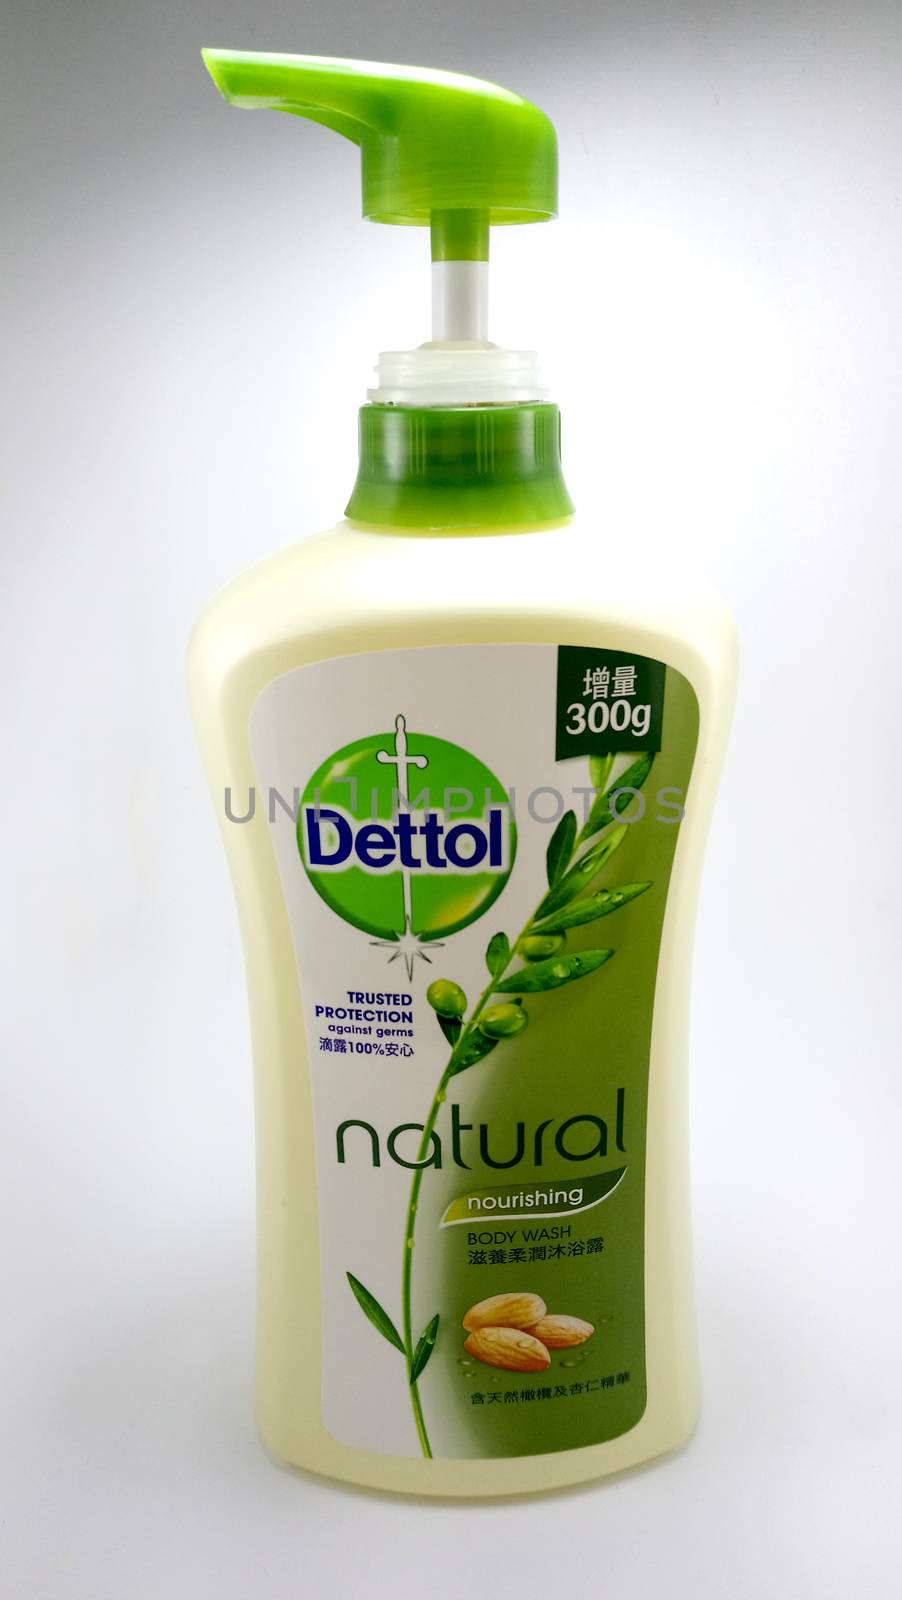 Dettol natural nourishing body wash in Manila, Philippines by imwaltersy